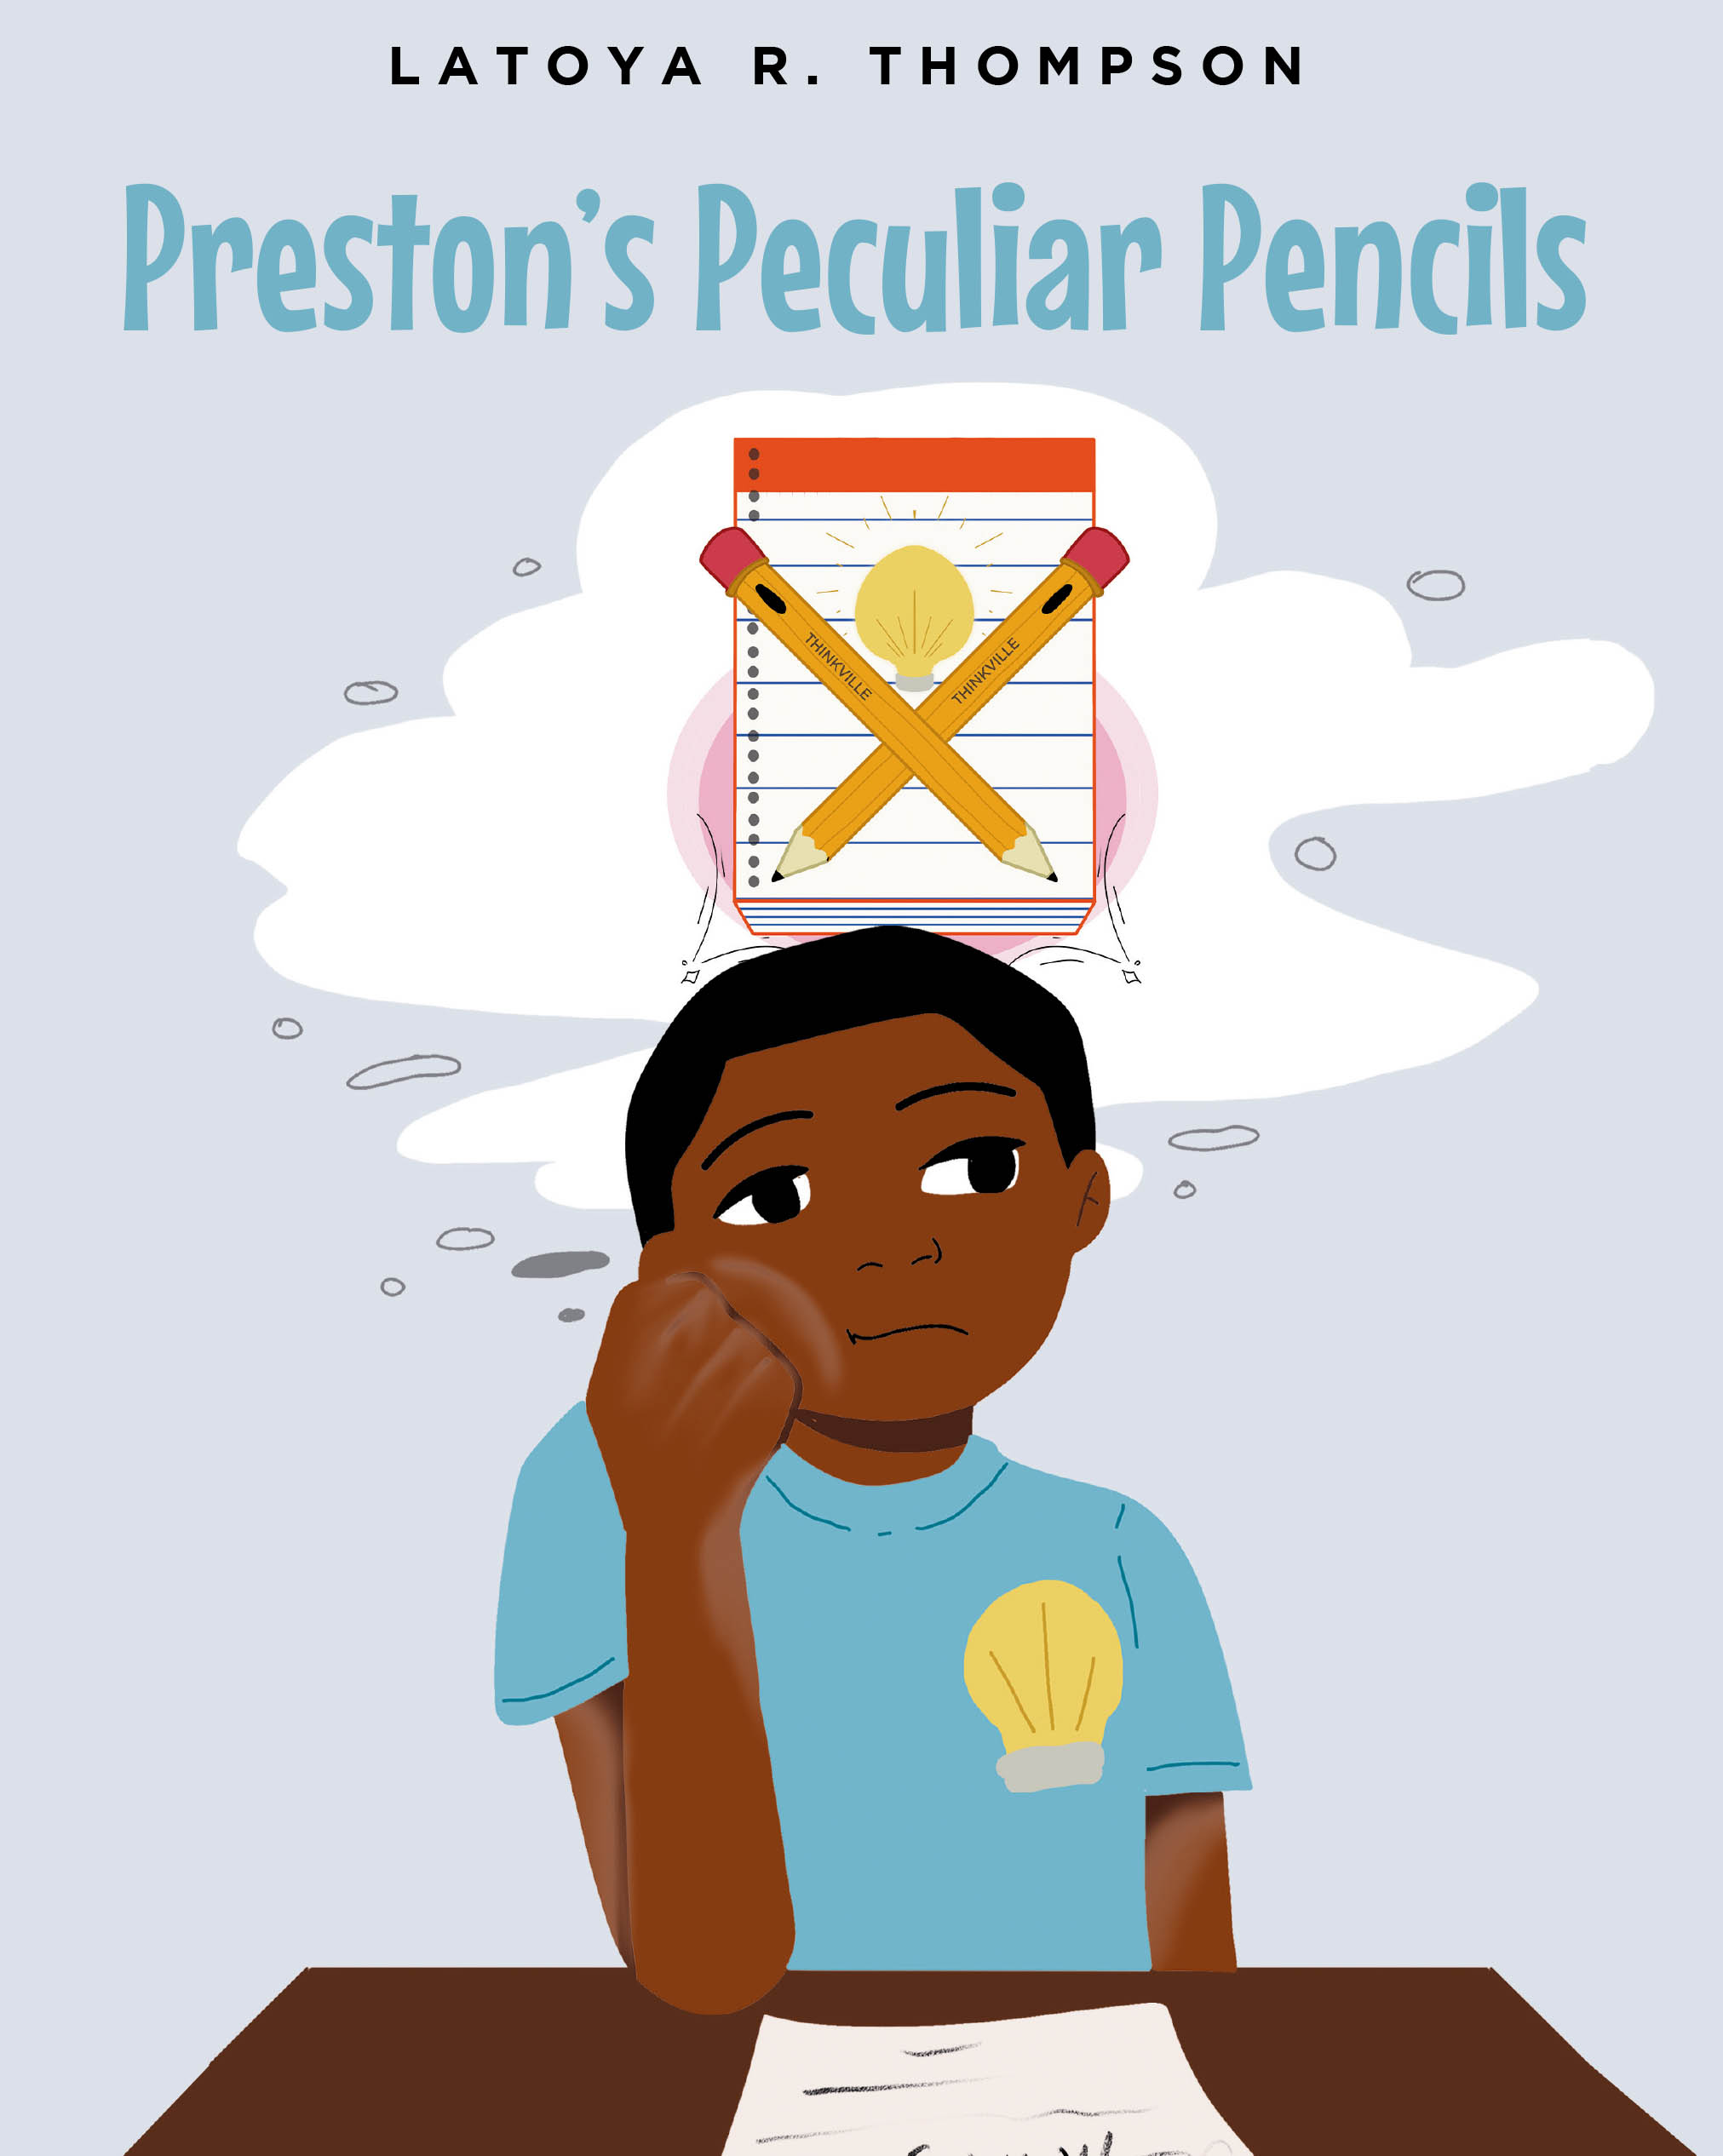 LaToya R. Thompson’s New Book, “Preston's Peculiar Pencils,” Follows a Young Boy Who, After Realizing His Special Pencils Are Missing, Goes on an Imaginative Adventure